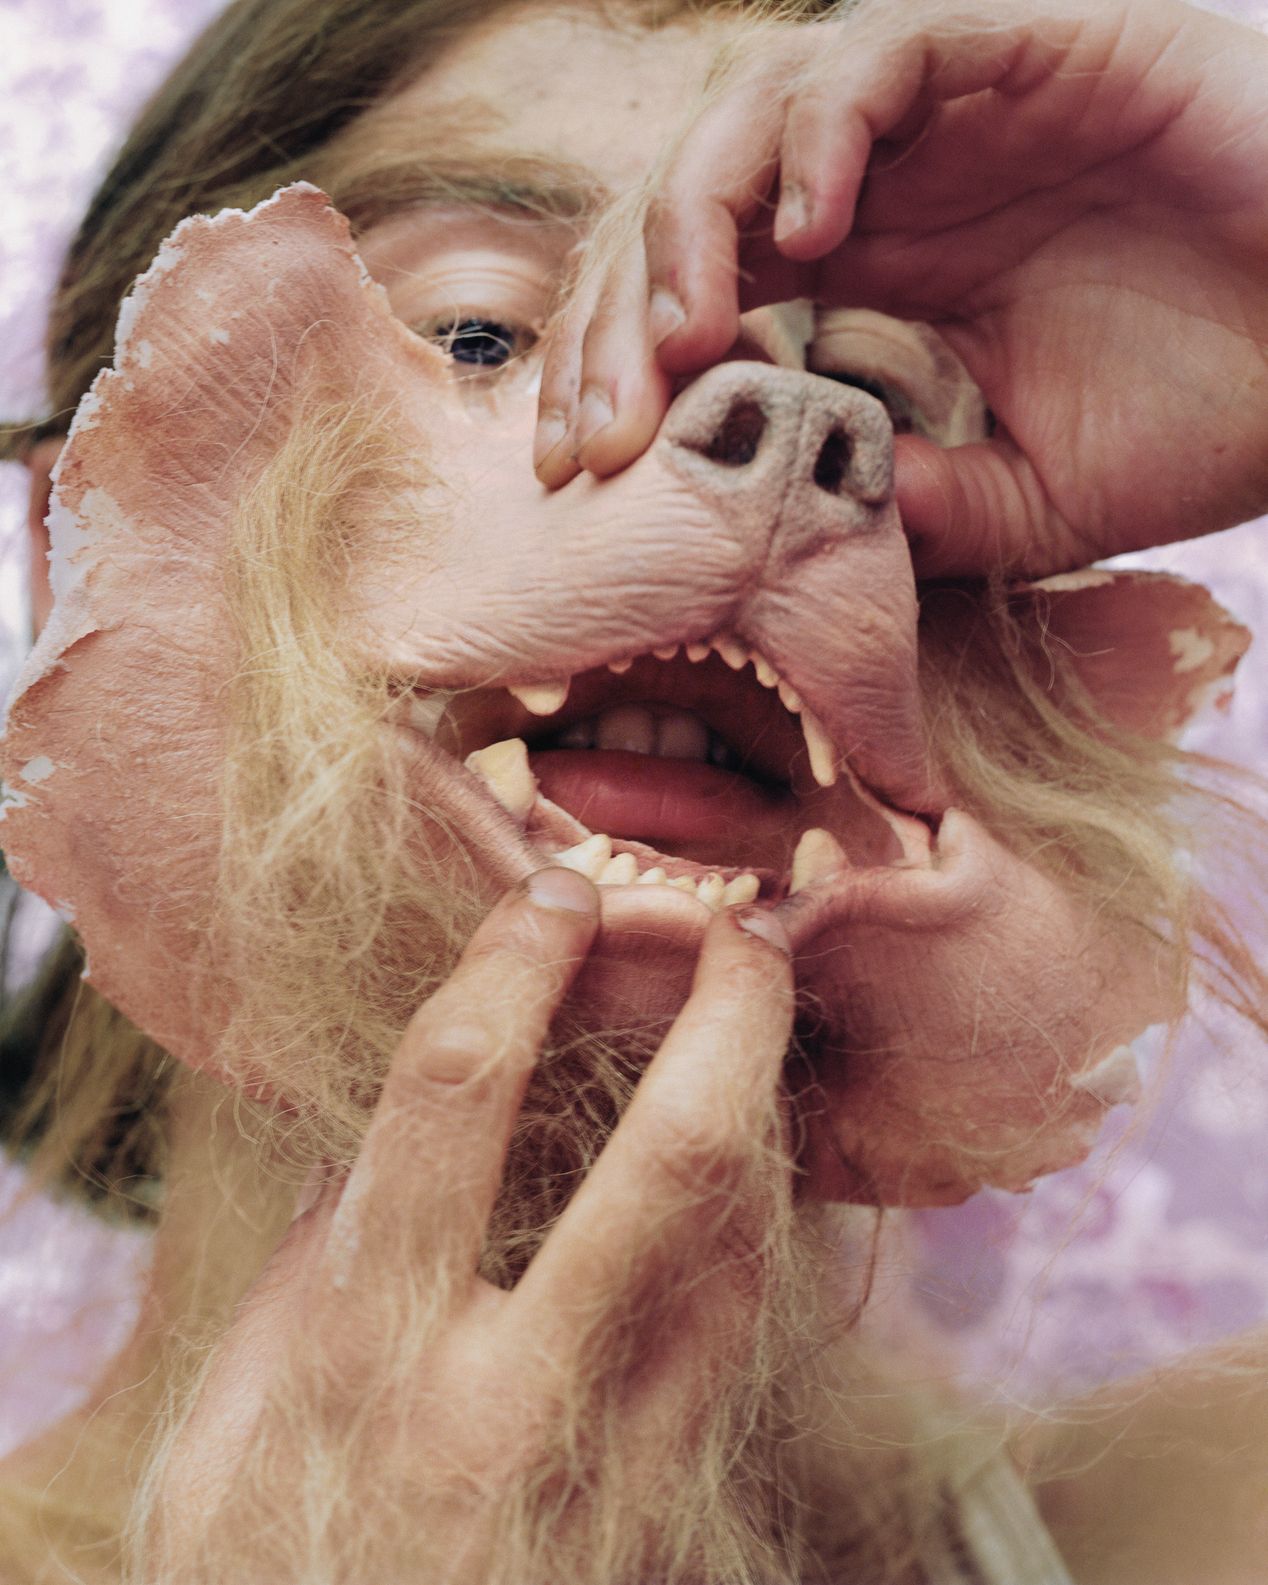 Young woman is fitting a dog mouth prosthetic on her face, art photography, Ilona Szwarc, contemporary Los Angeles artist.